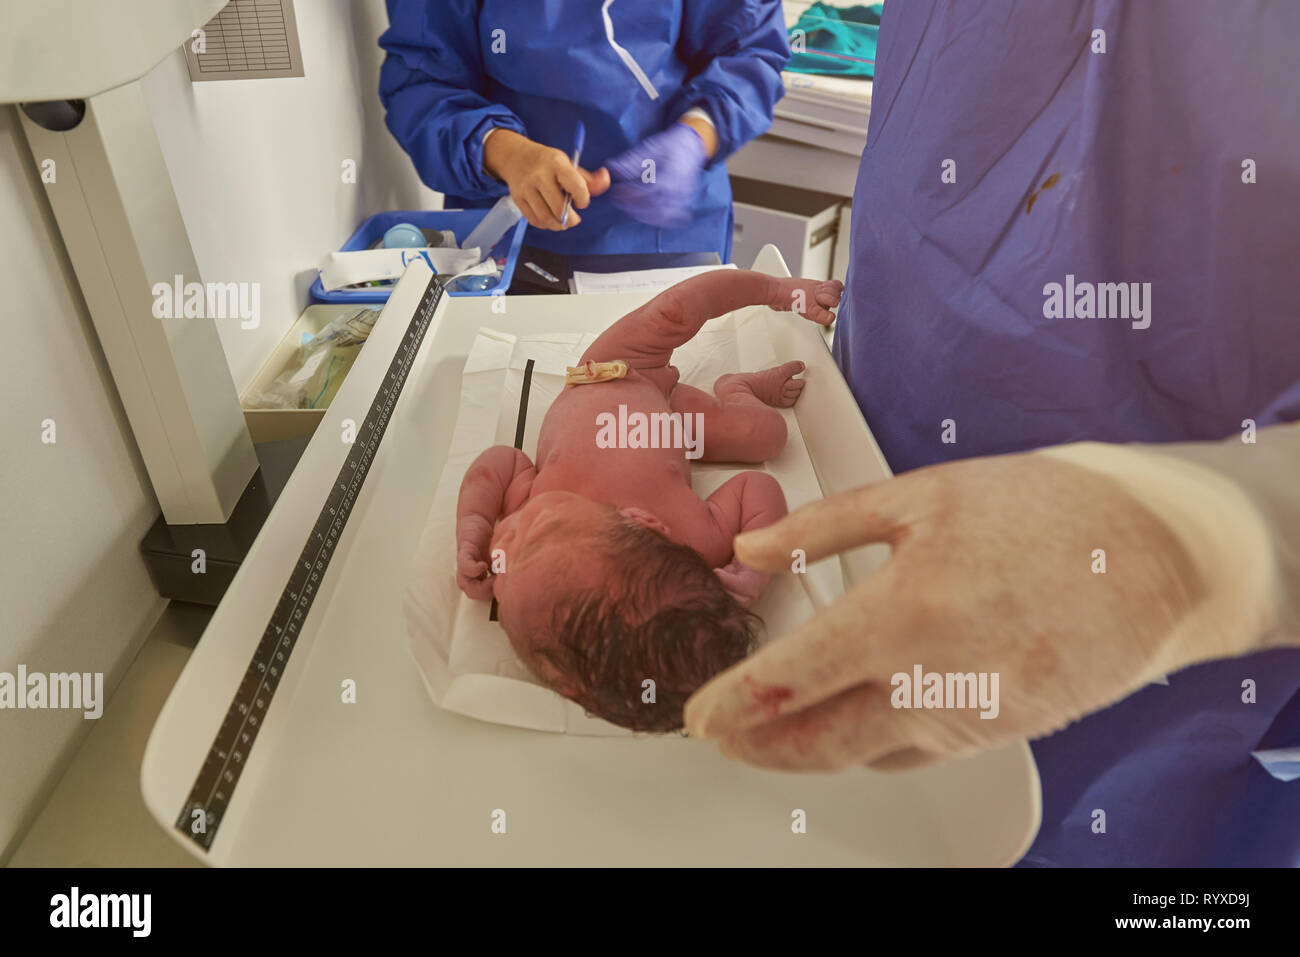 Measuring weight of newborn baby in hospital background Stock Photo